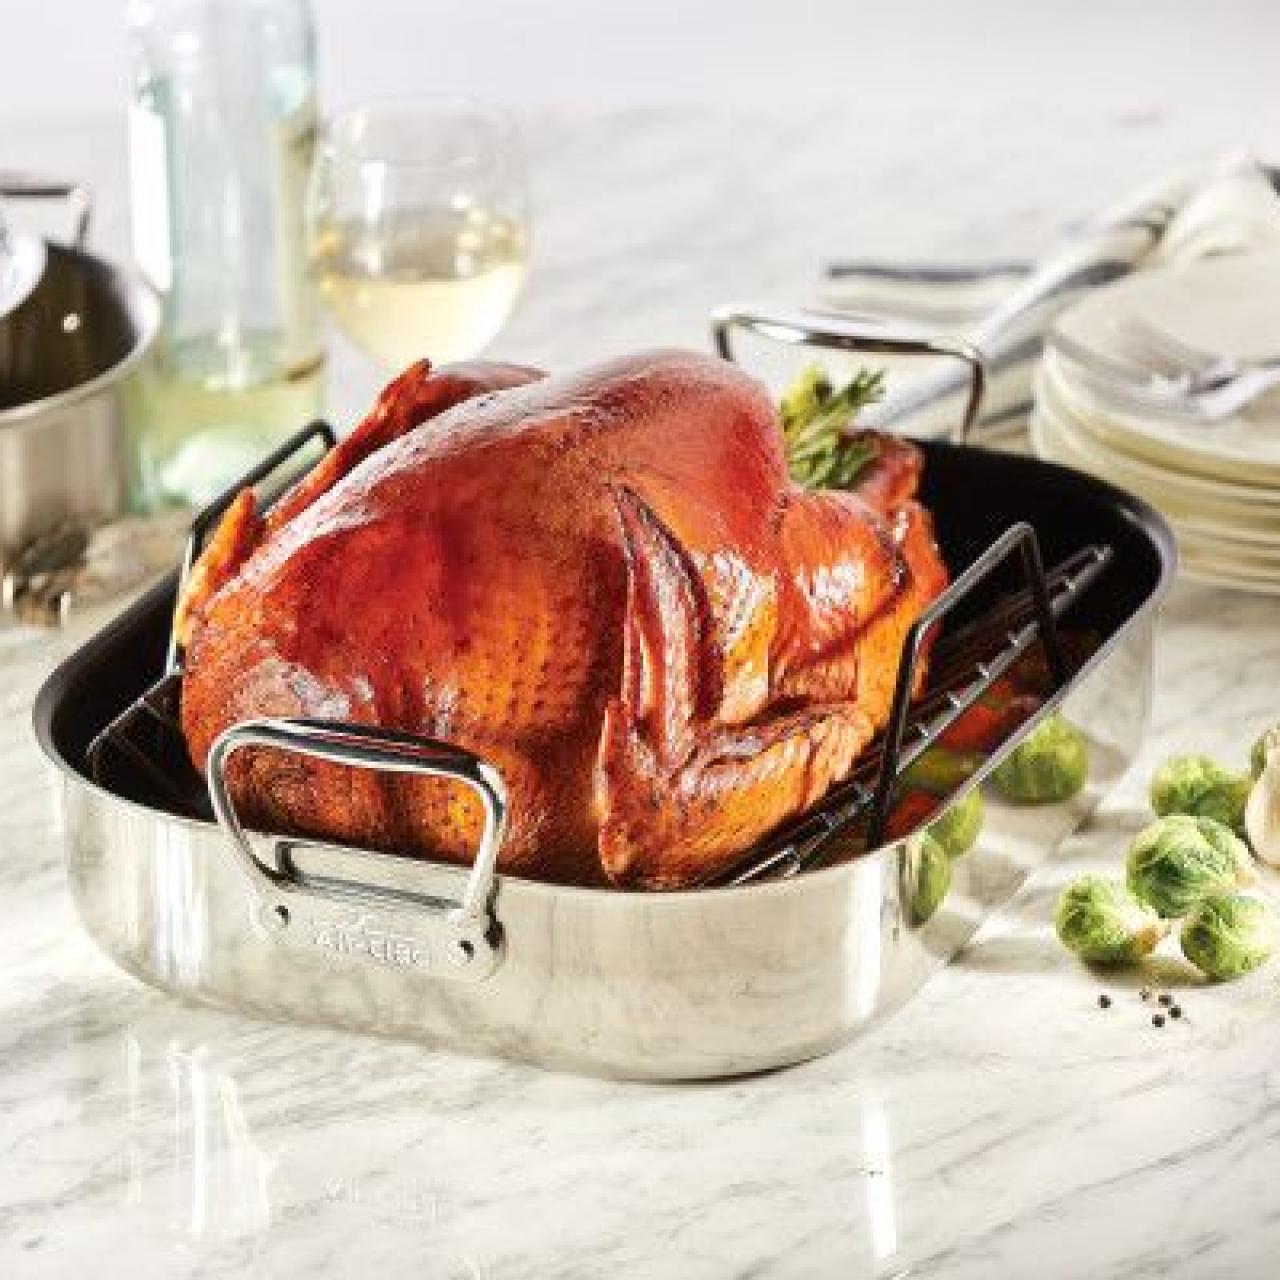 https://food.fnr.sndimg.com/content/dam/images/food/products/2020/1/17/rx_all-clad-nonstick-large-roaster.jpeg.rend.hgtvcom.1280.1280.suffix/1579298254756.jpeg